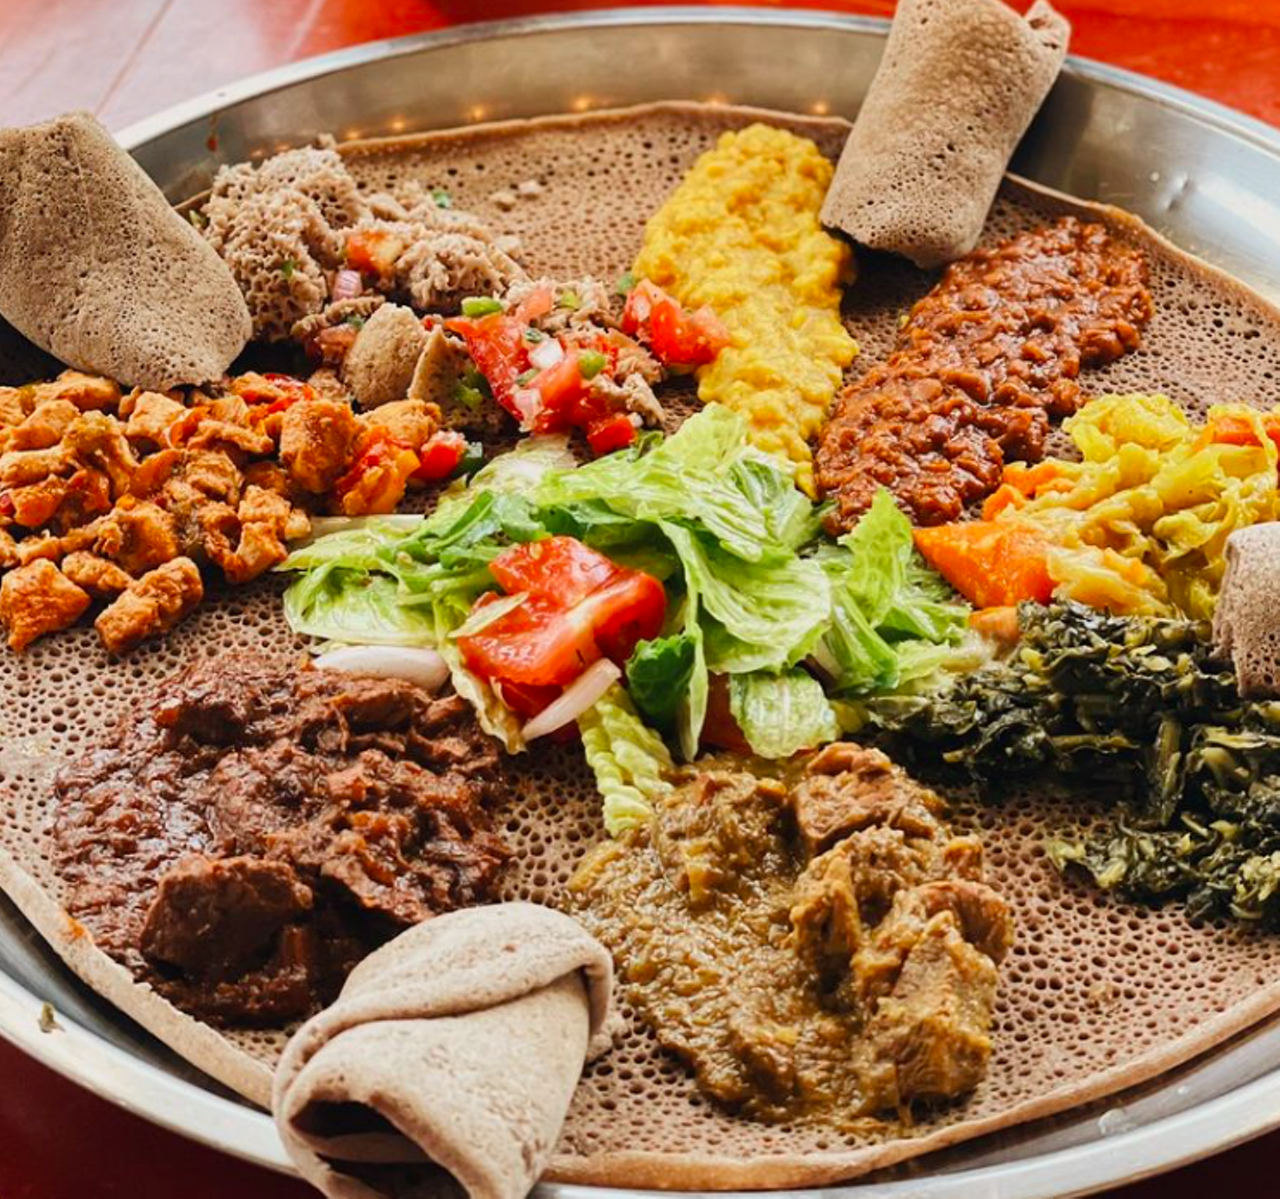 Selam Ethiopian & Eritrean Cuisine
5494 Central Florida Parkway, Orlando
A traditional Ethiopian dining experience that has placed in Yelp's national Top 100 Restaurants multiple years.